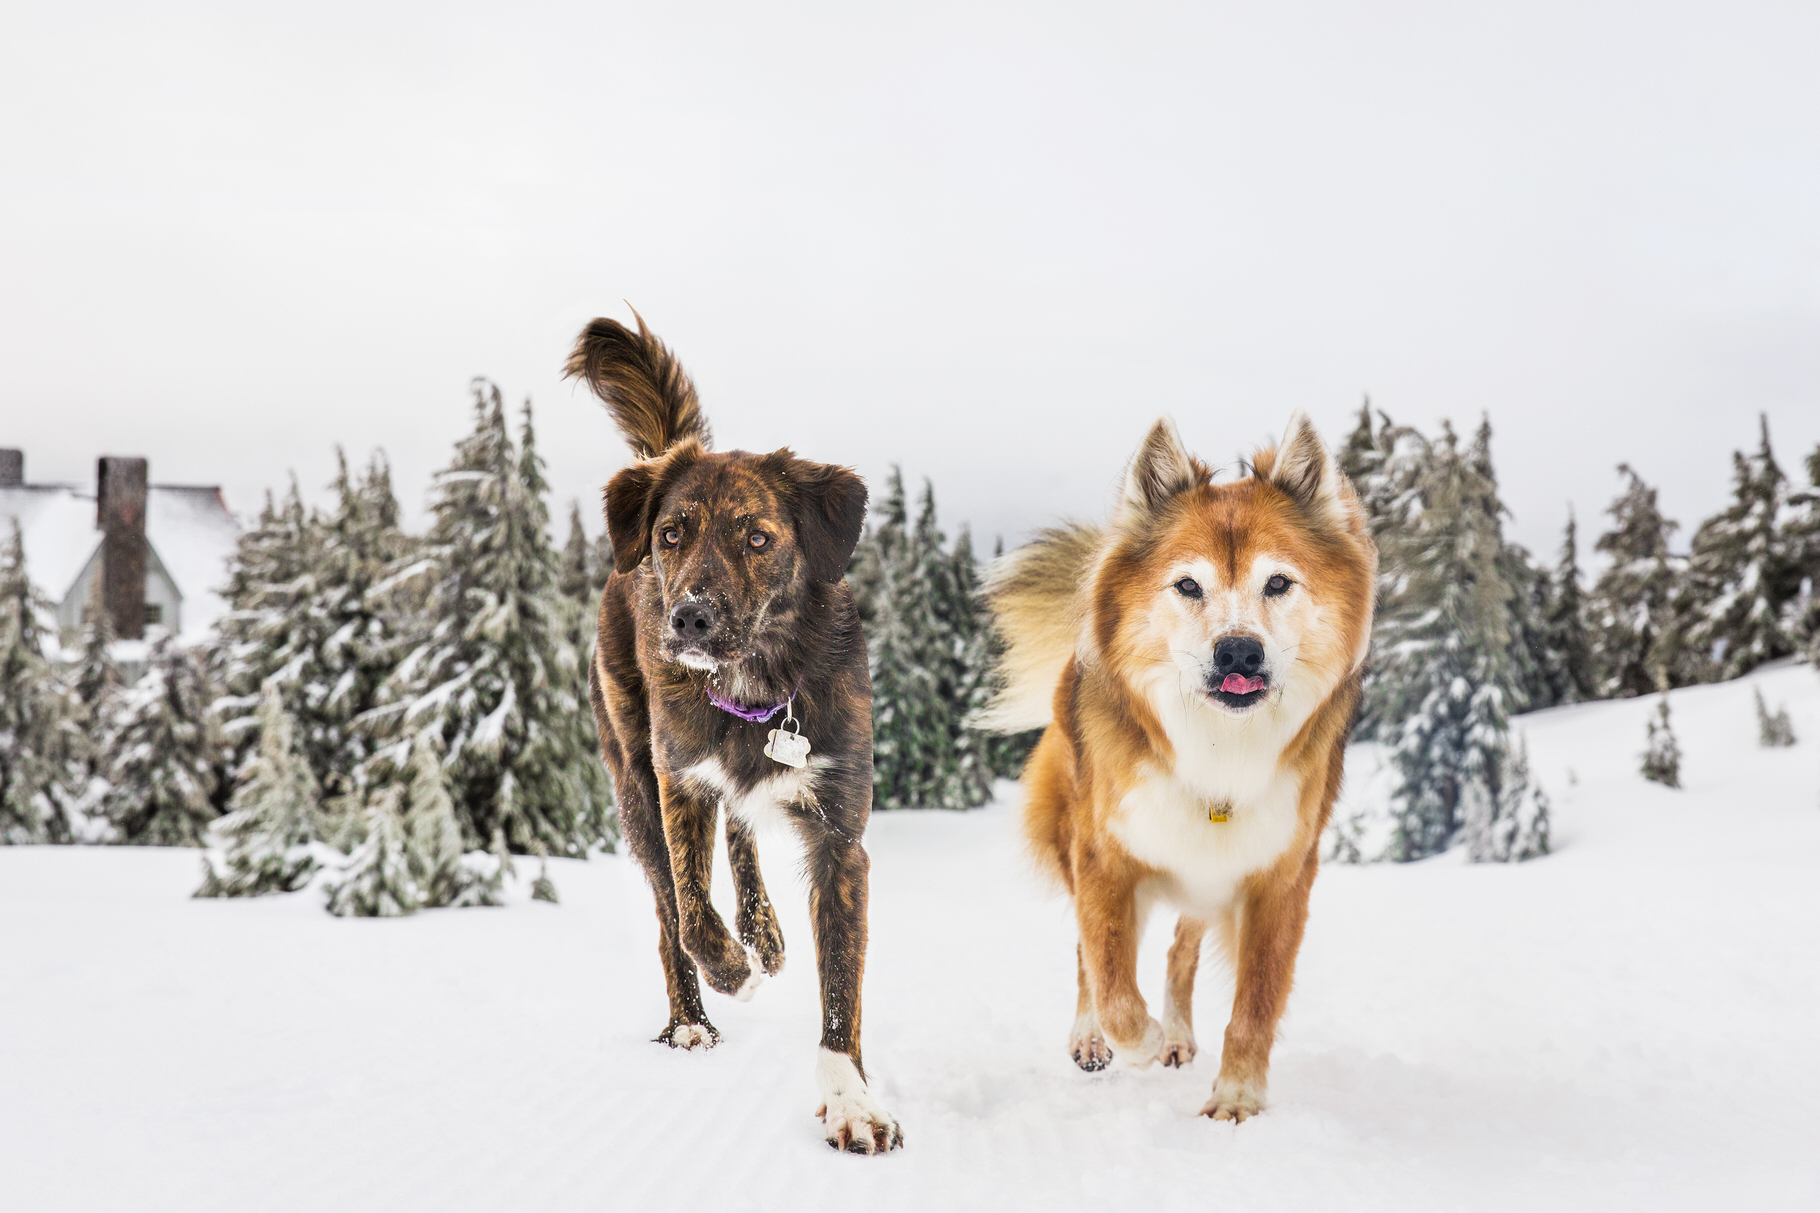 Aspen & Hazel  | Dog Photos in the Snow at Timberline Lodge